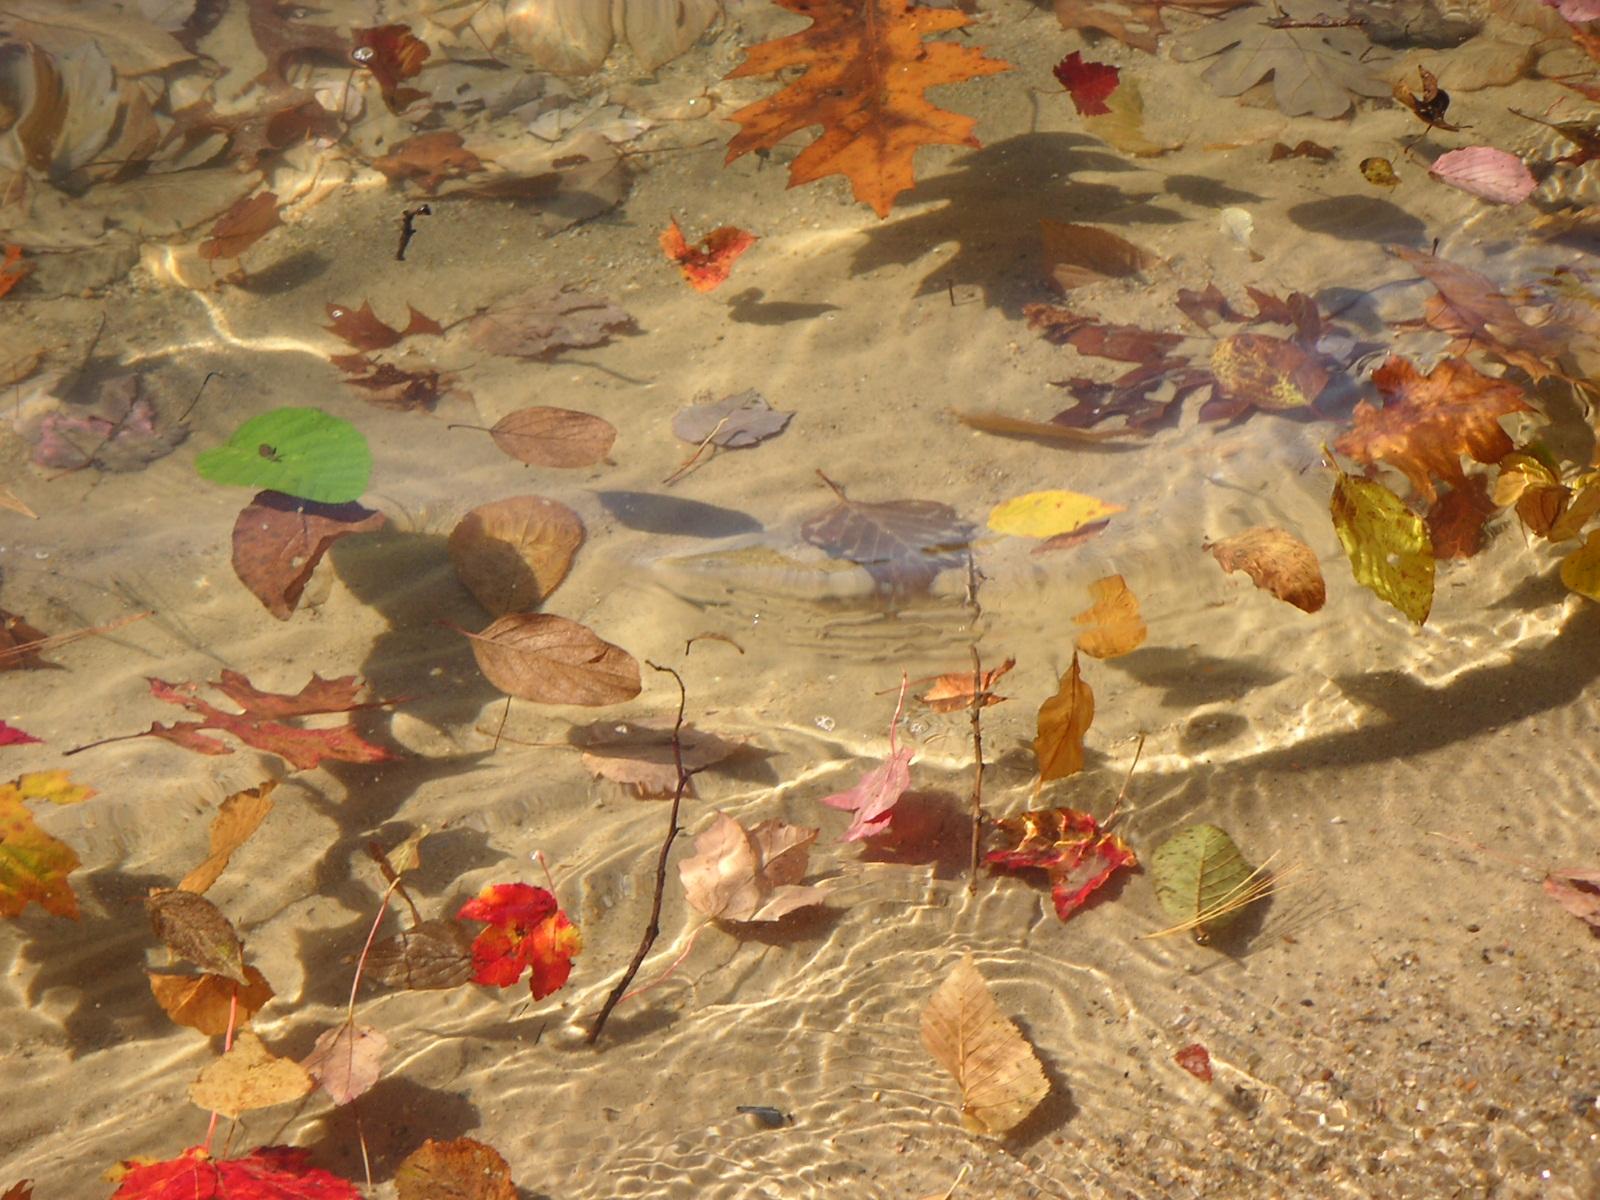 Foliage in the Water (user submitted)